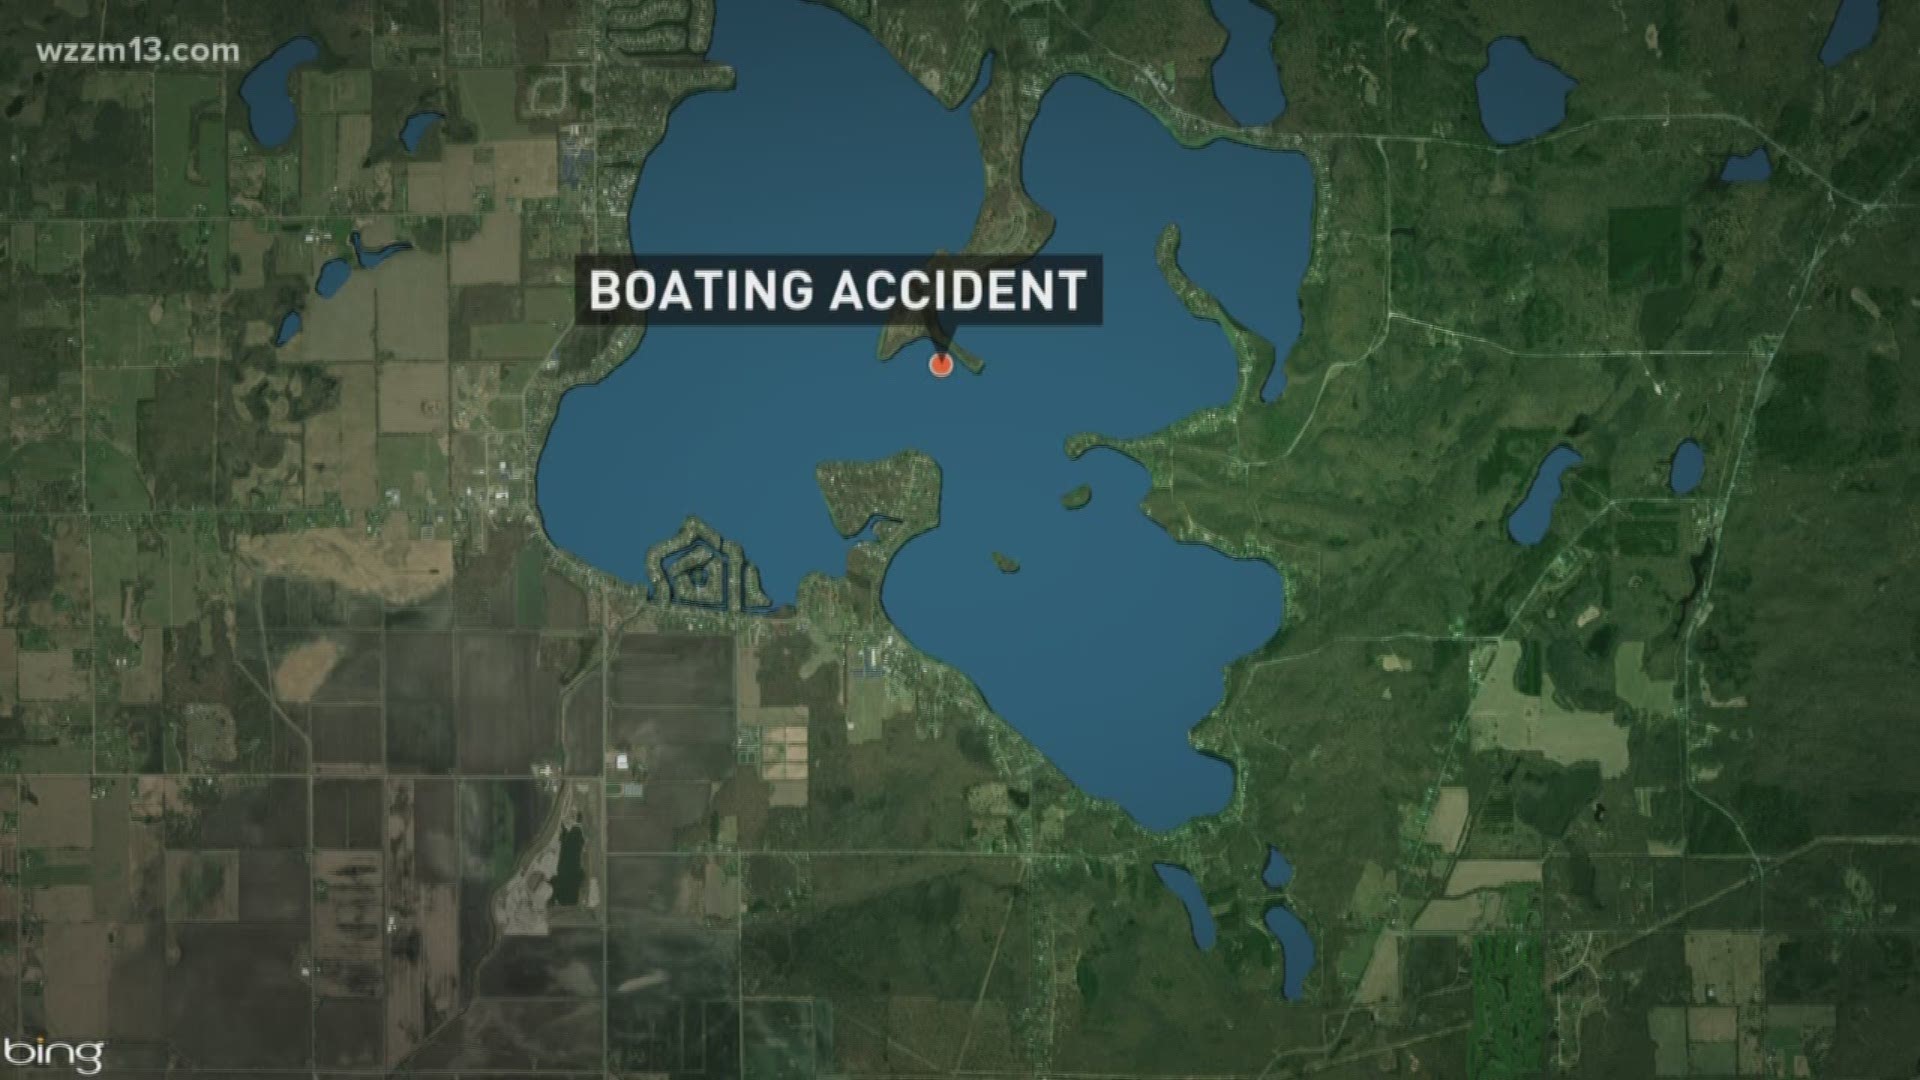 Man lost leg in boating accident